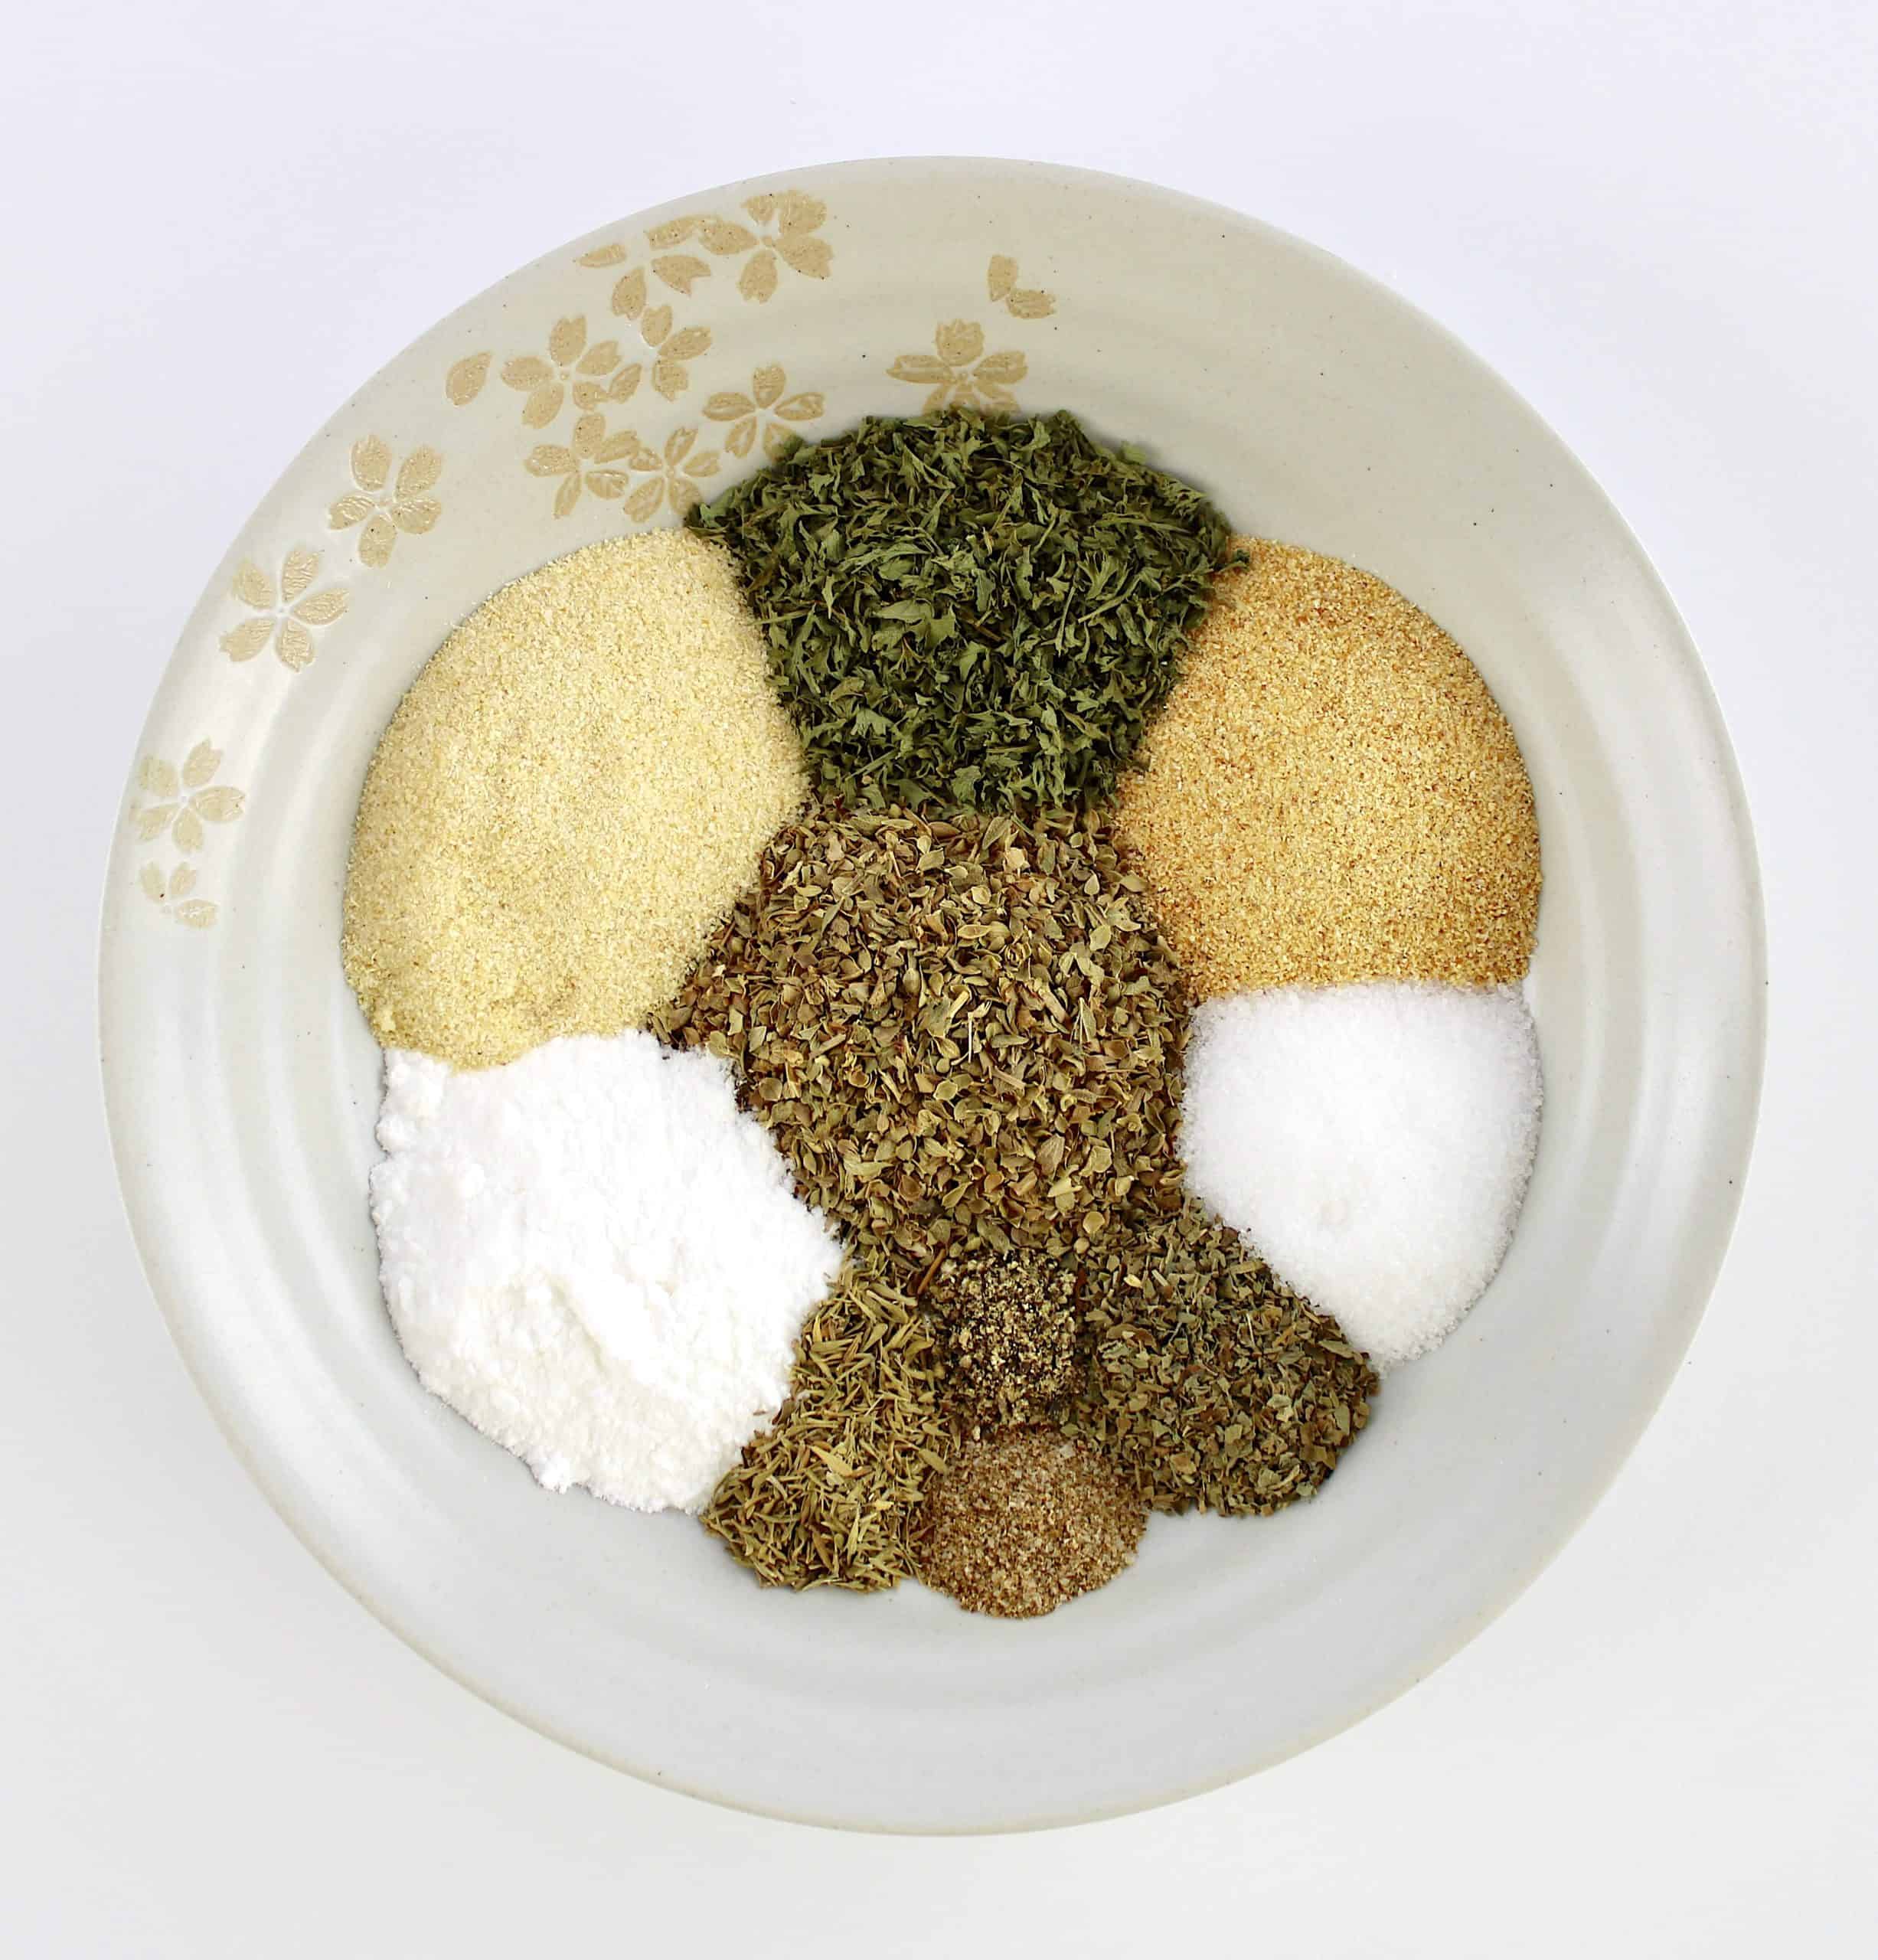 10 different herbs and spices in beige bowl unmixed